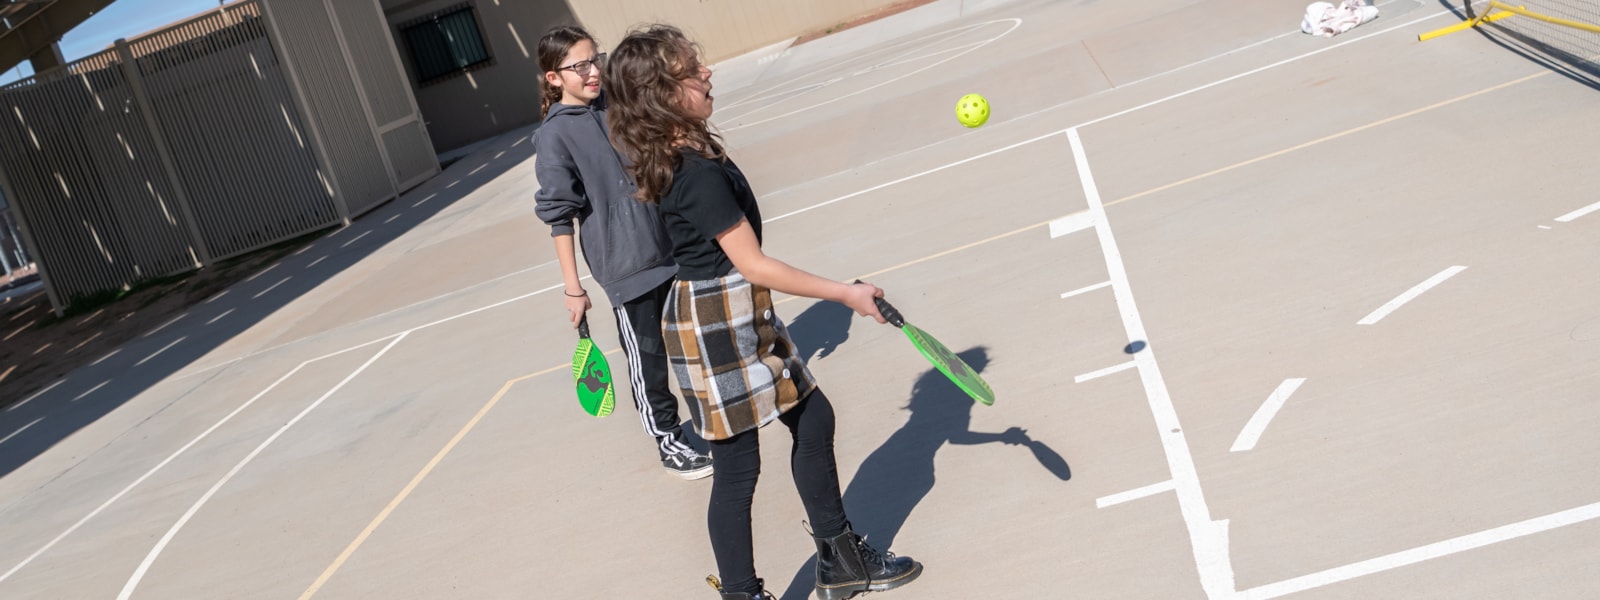 students playing pickleball